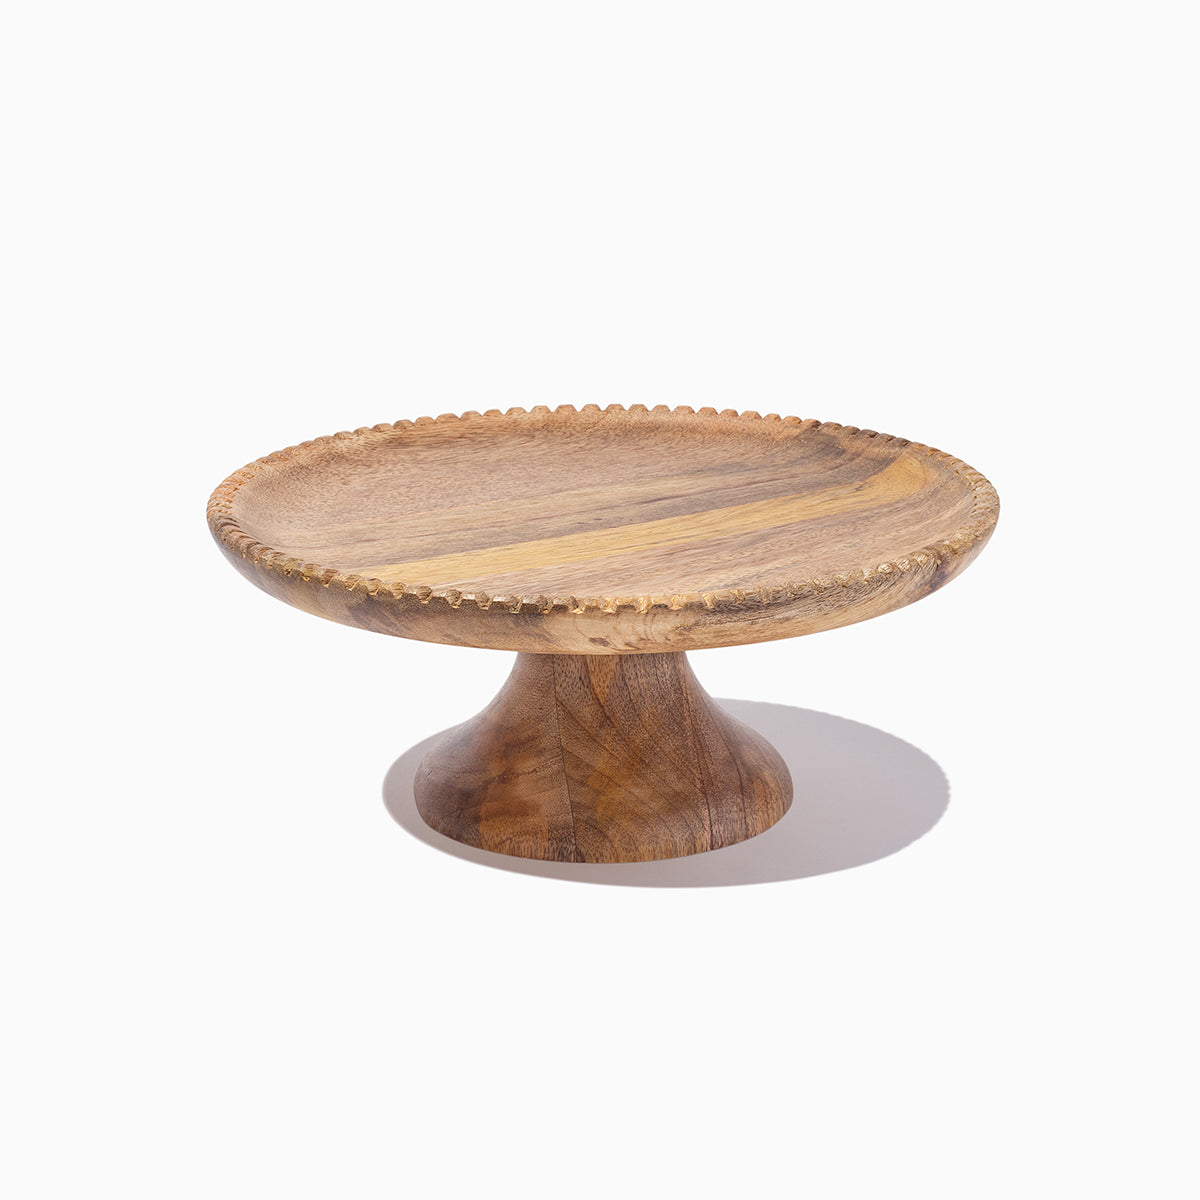 Wooden Cake Plate | Product Image | Uncommon James Home